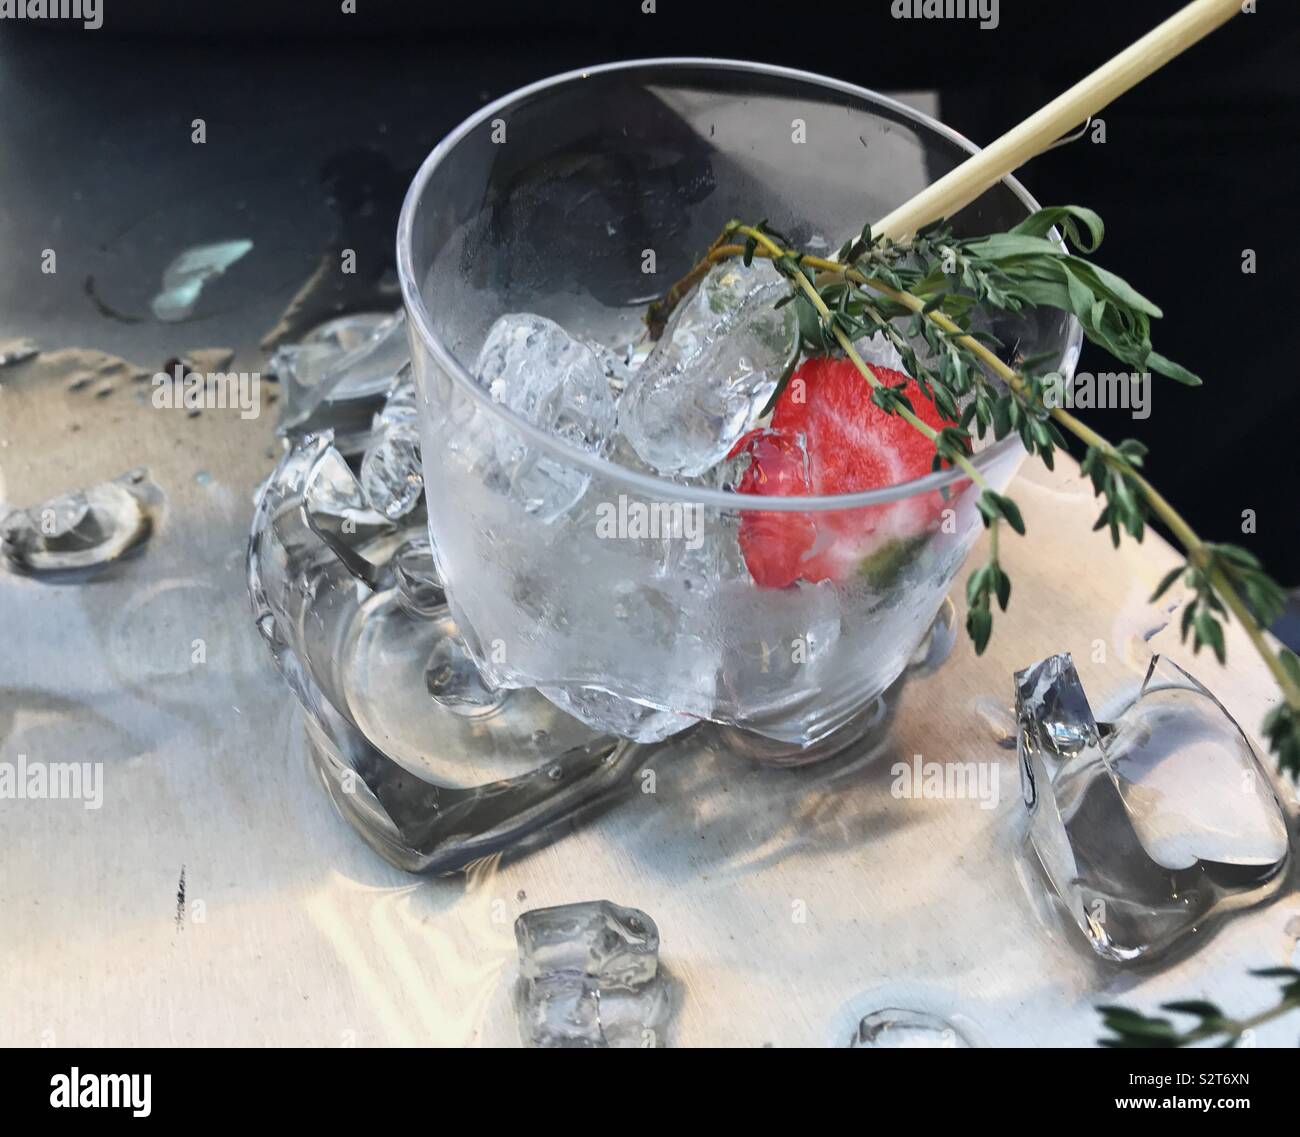 Cocktail glass garnished with strawberry, thyme, and lemongrass sits broken on a stainless steel surface, surrounded by ice, alcohol, and broken glass. Stock Photo